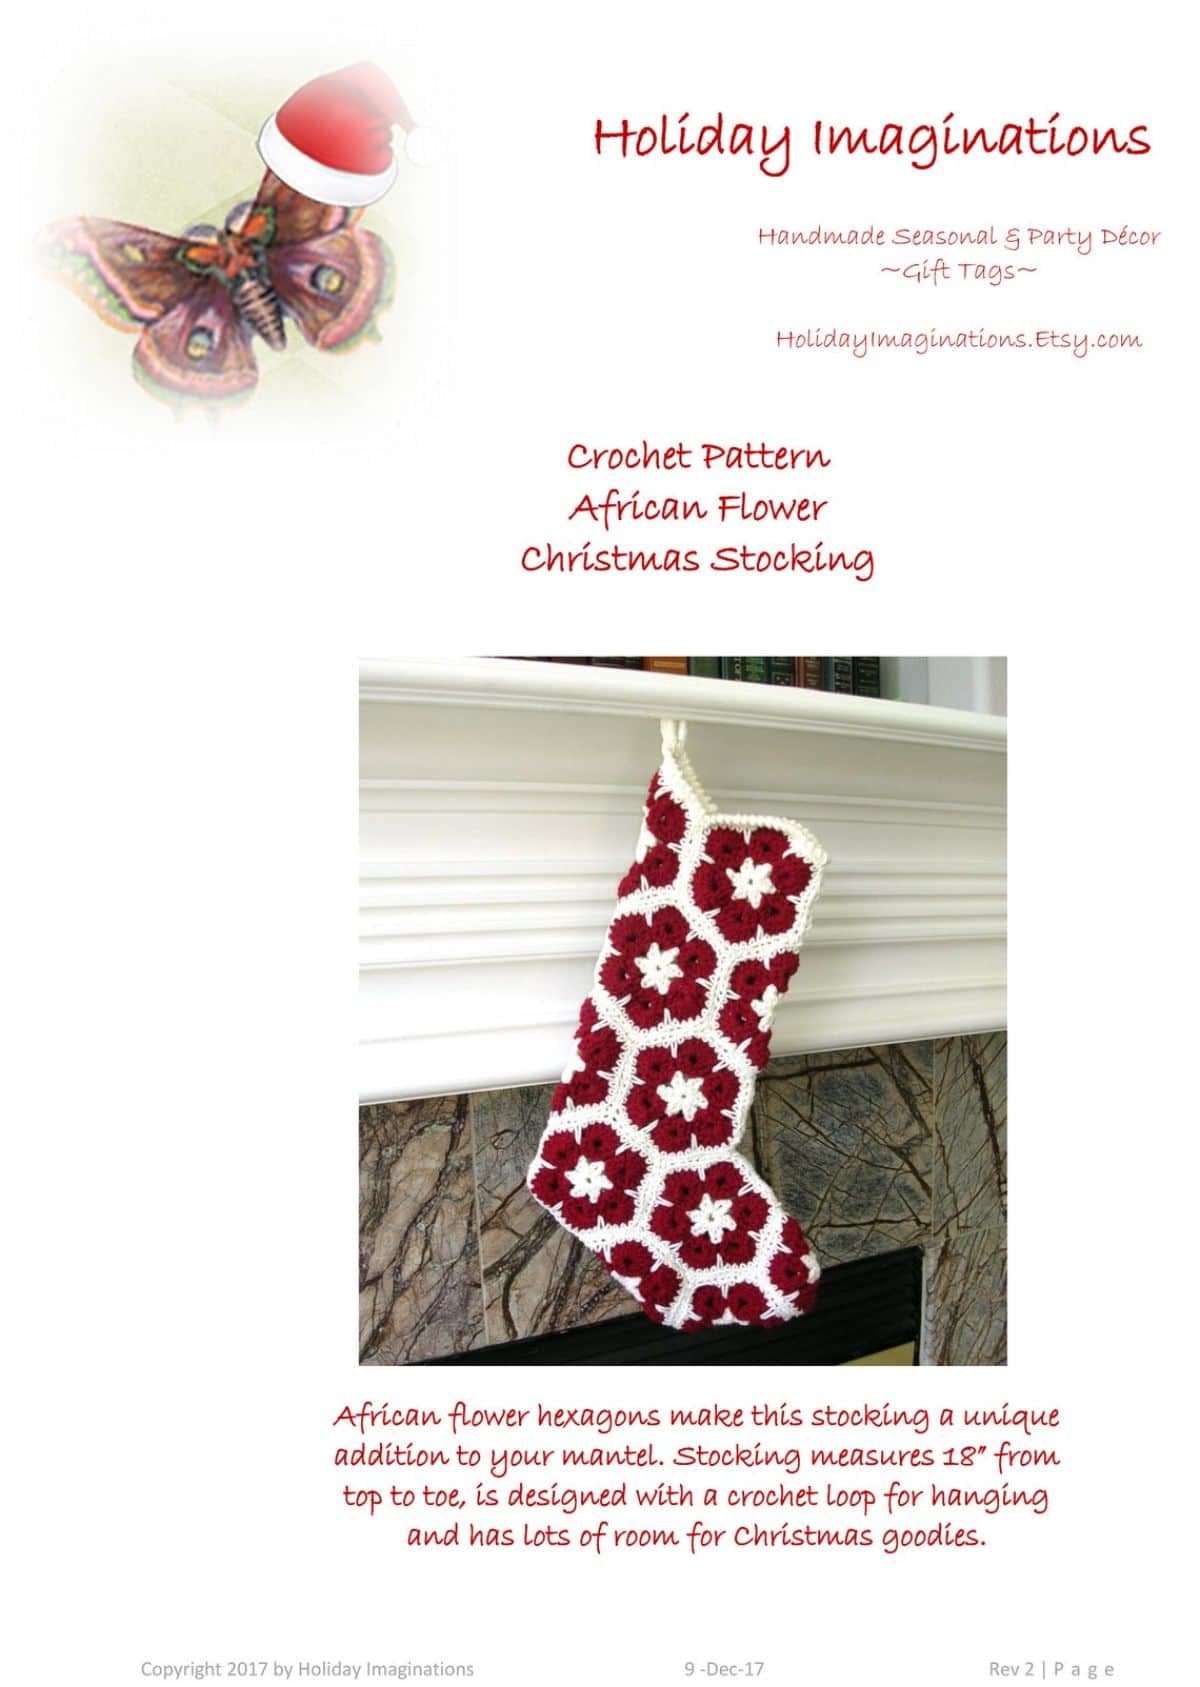 White stocking hanging from a white and gray marble fireplace with red flowers in a hexagon shape stitched all over it.